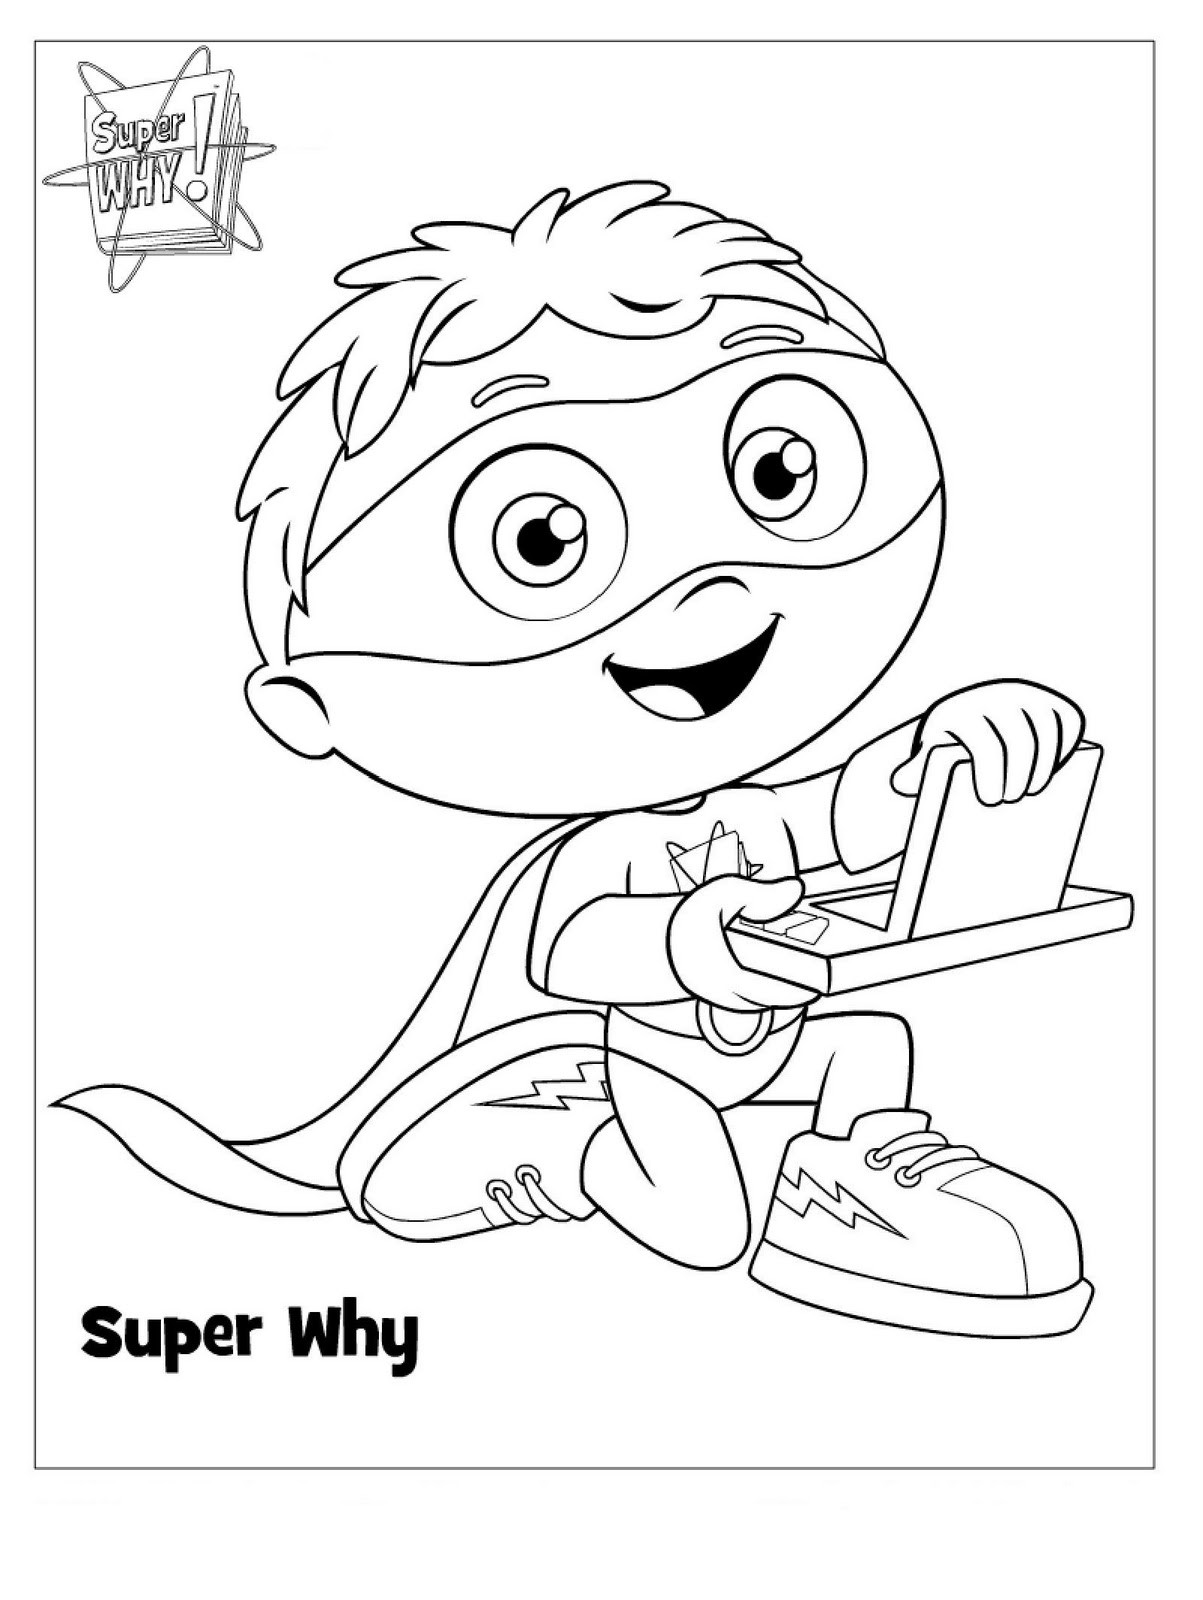 Kids Coloring Book
 Super Why Coloring Pages Best Coloring Pages For Kids